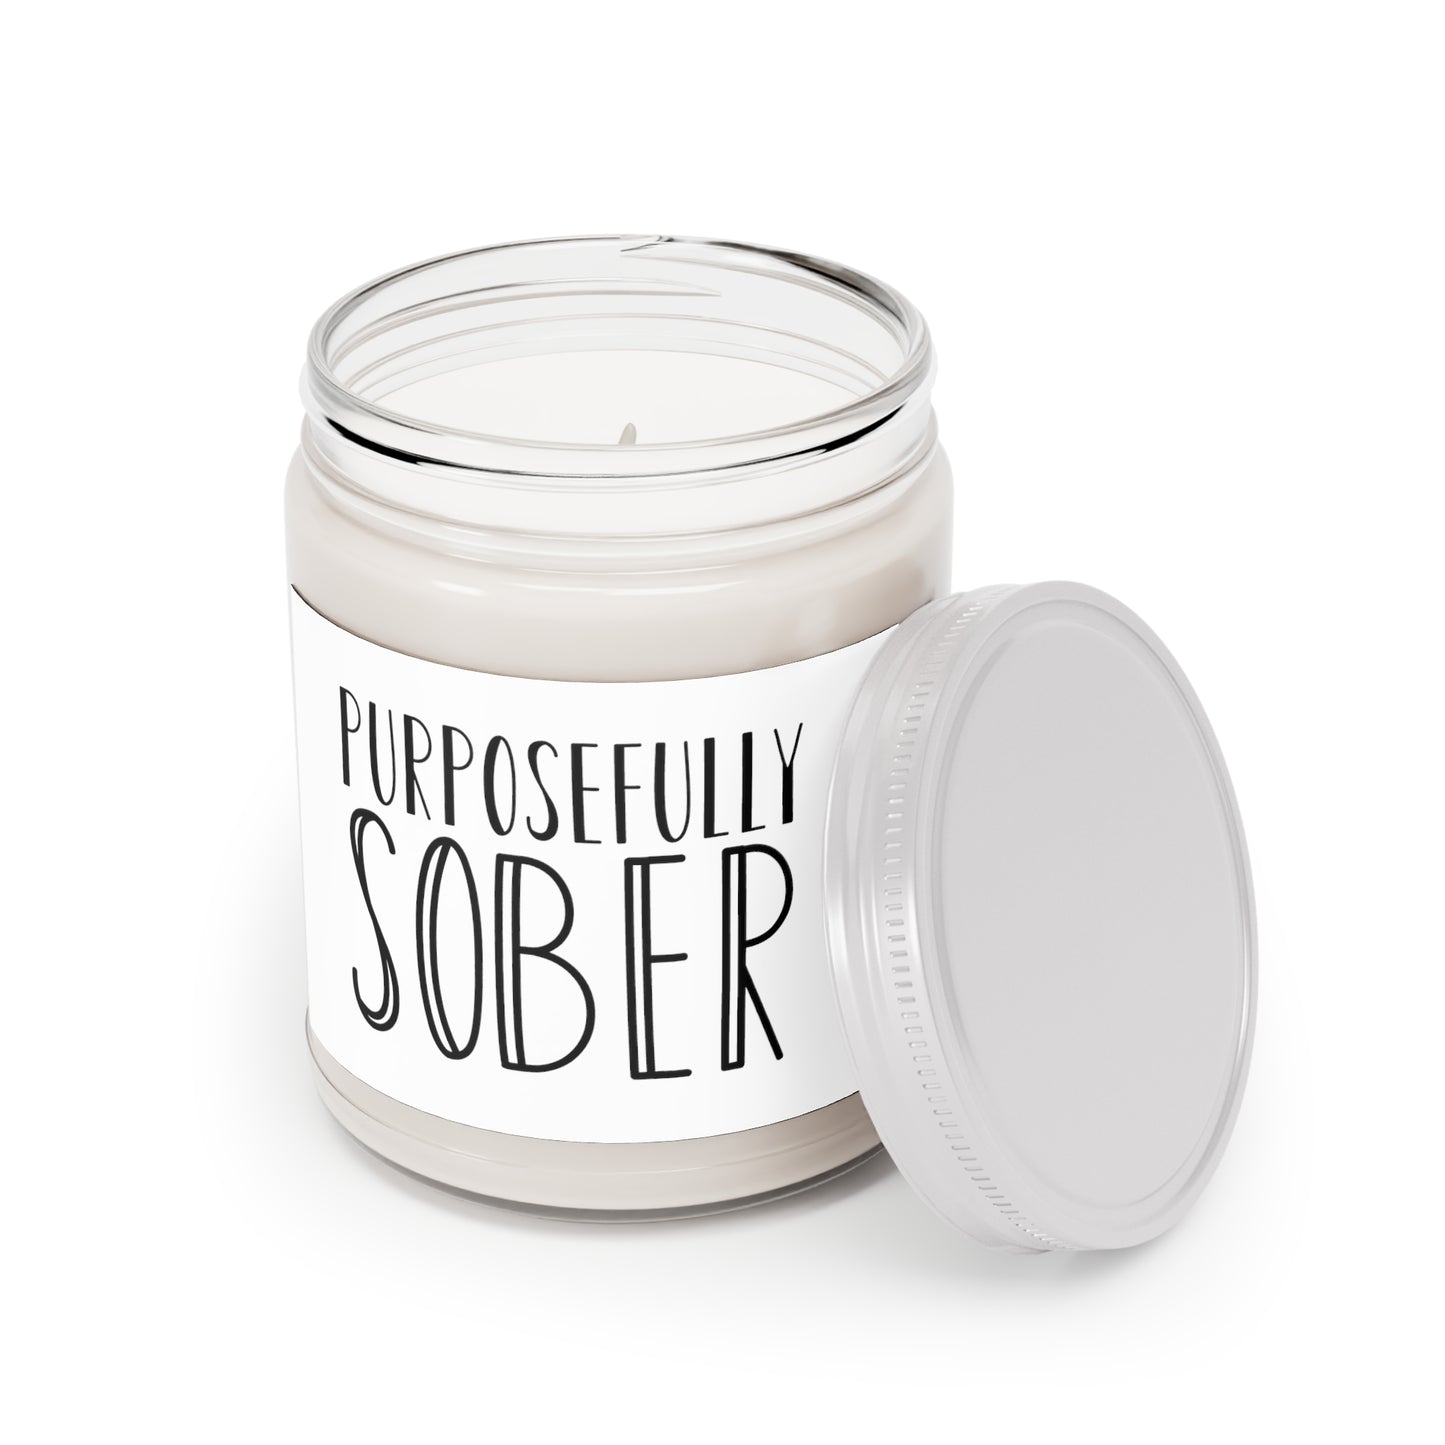 Purposefully Sober Scented Candles, 9oz